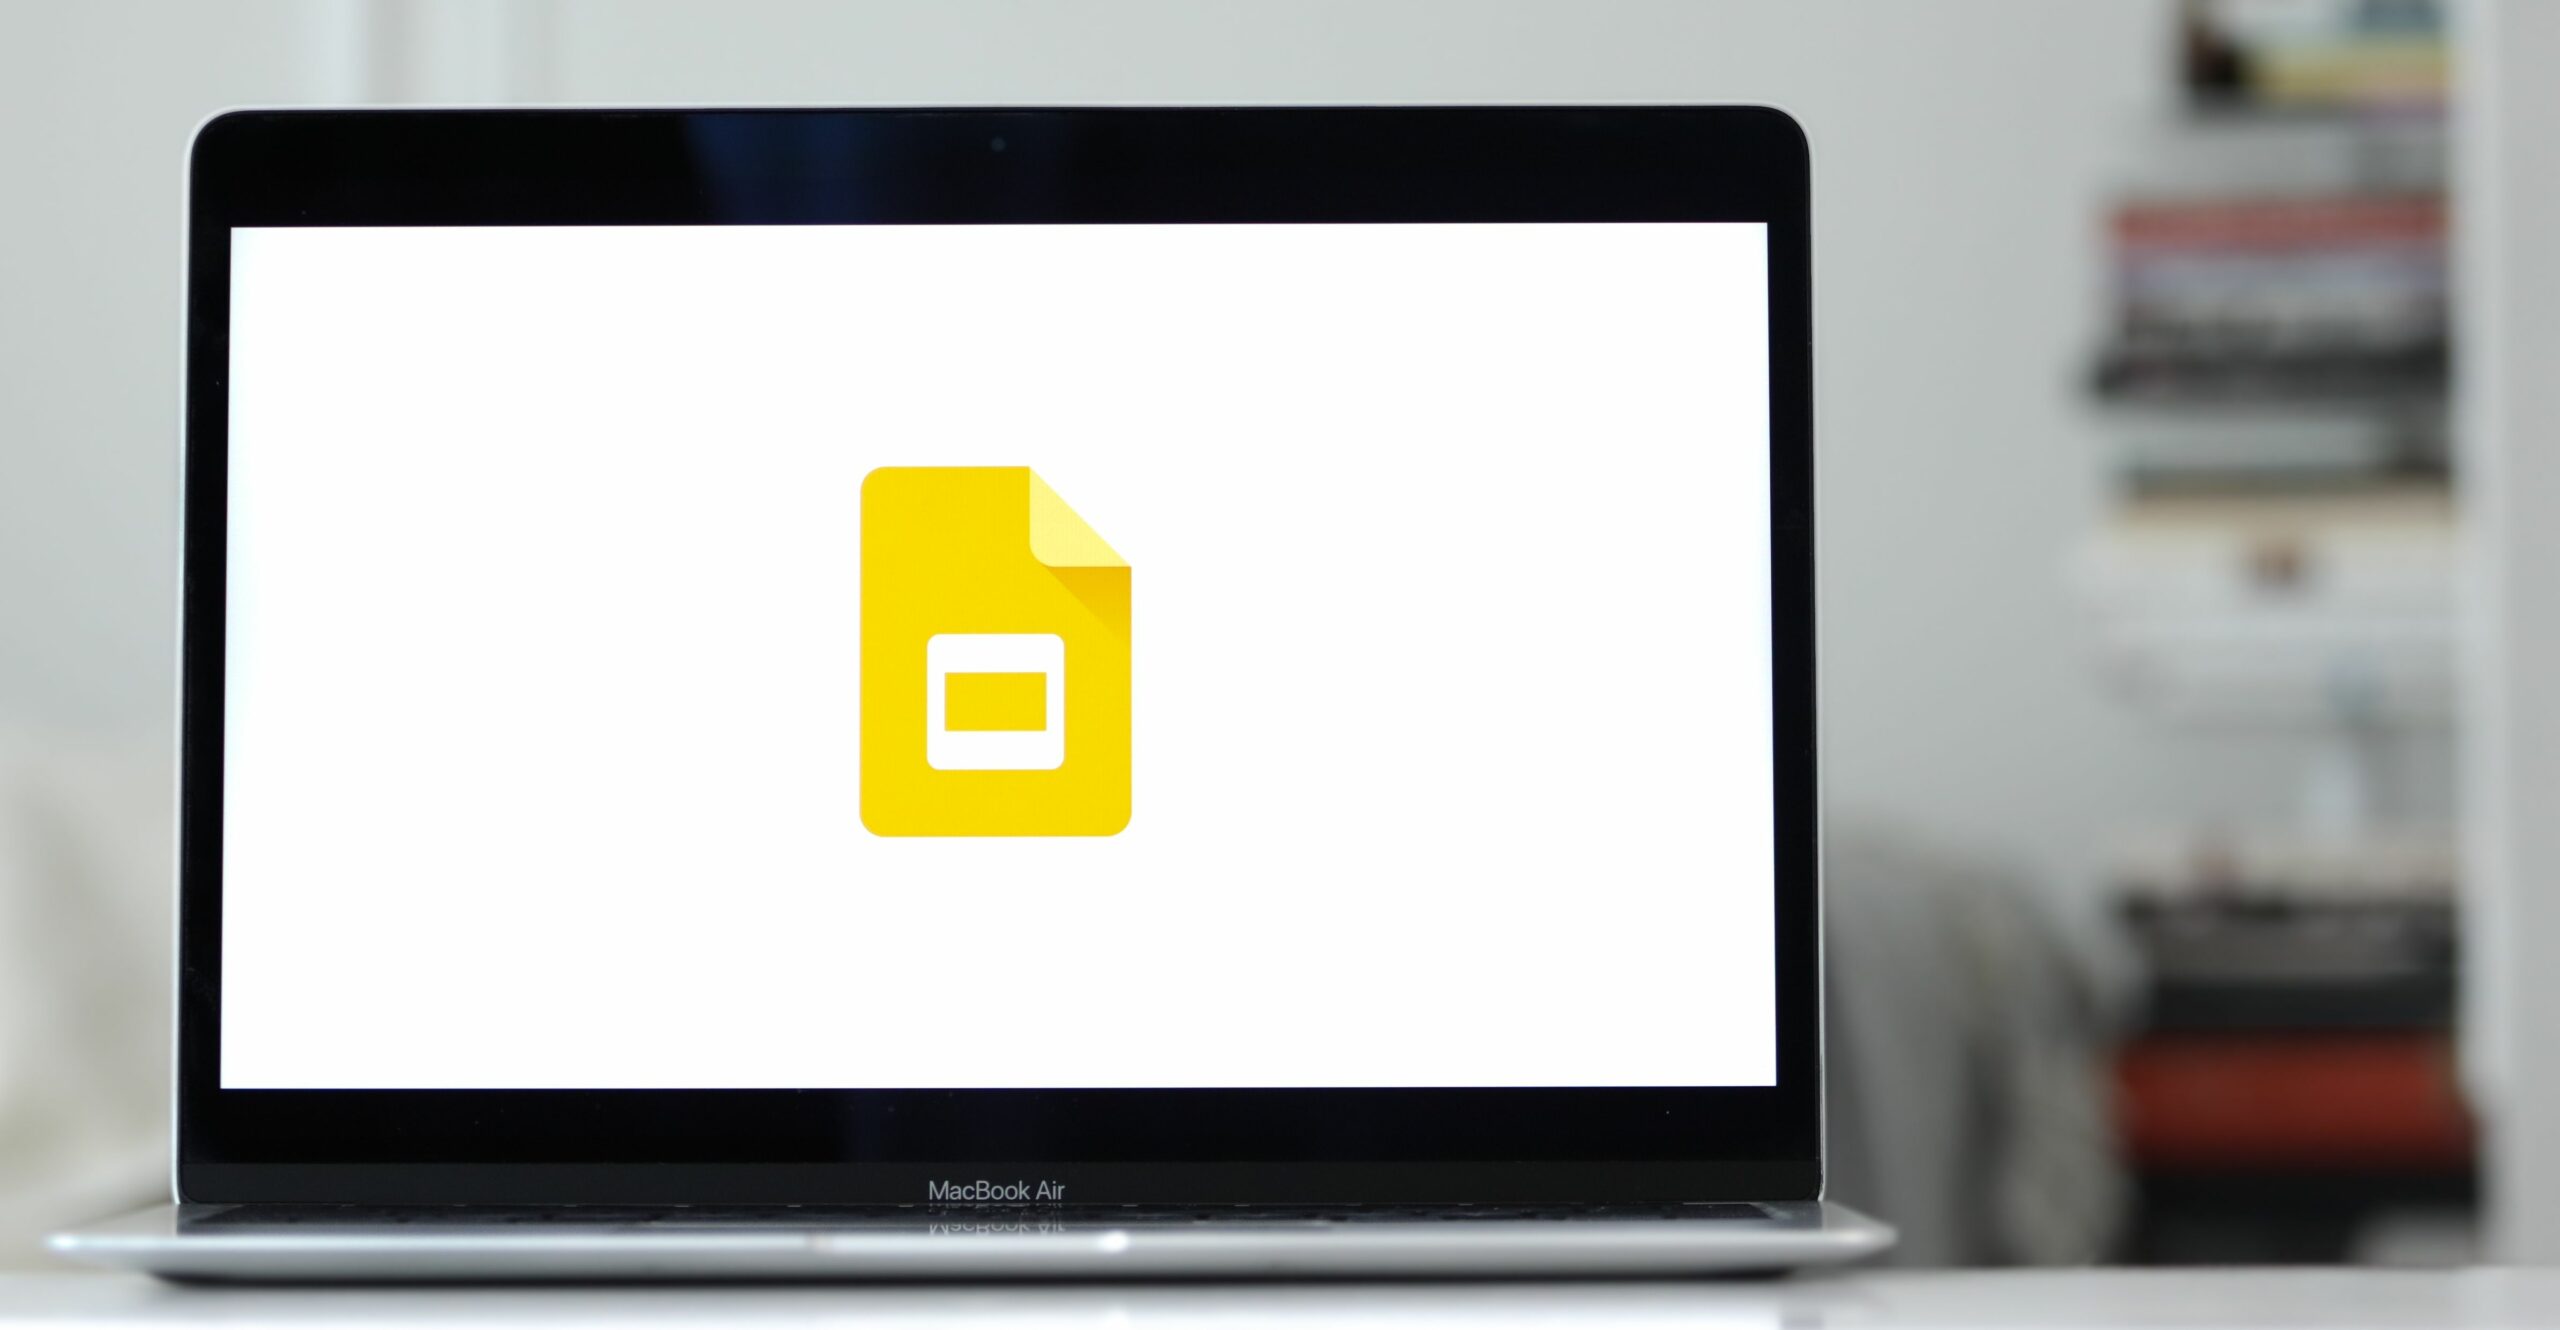 How to Add a GIF to Google Slides